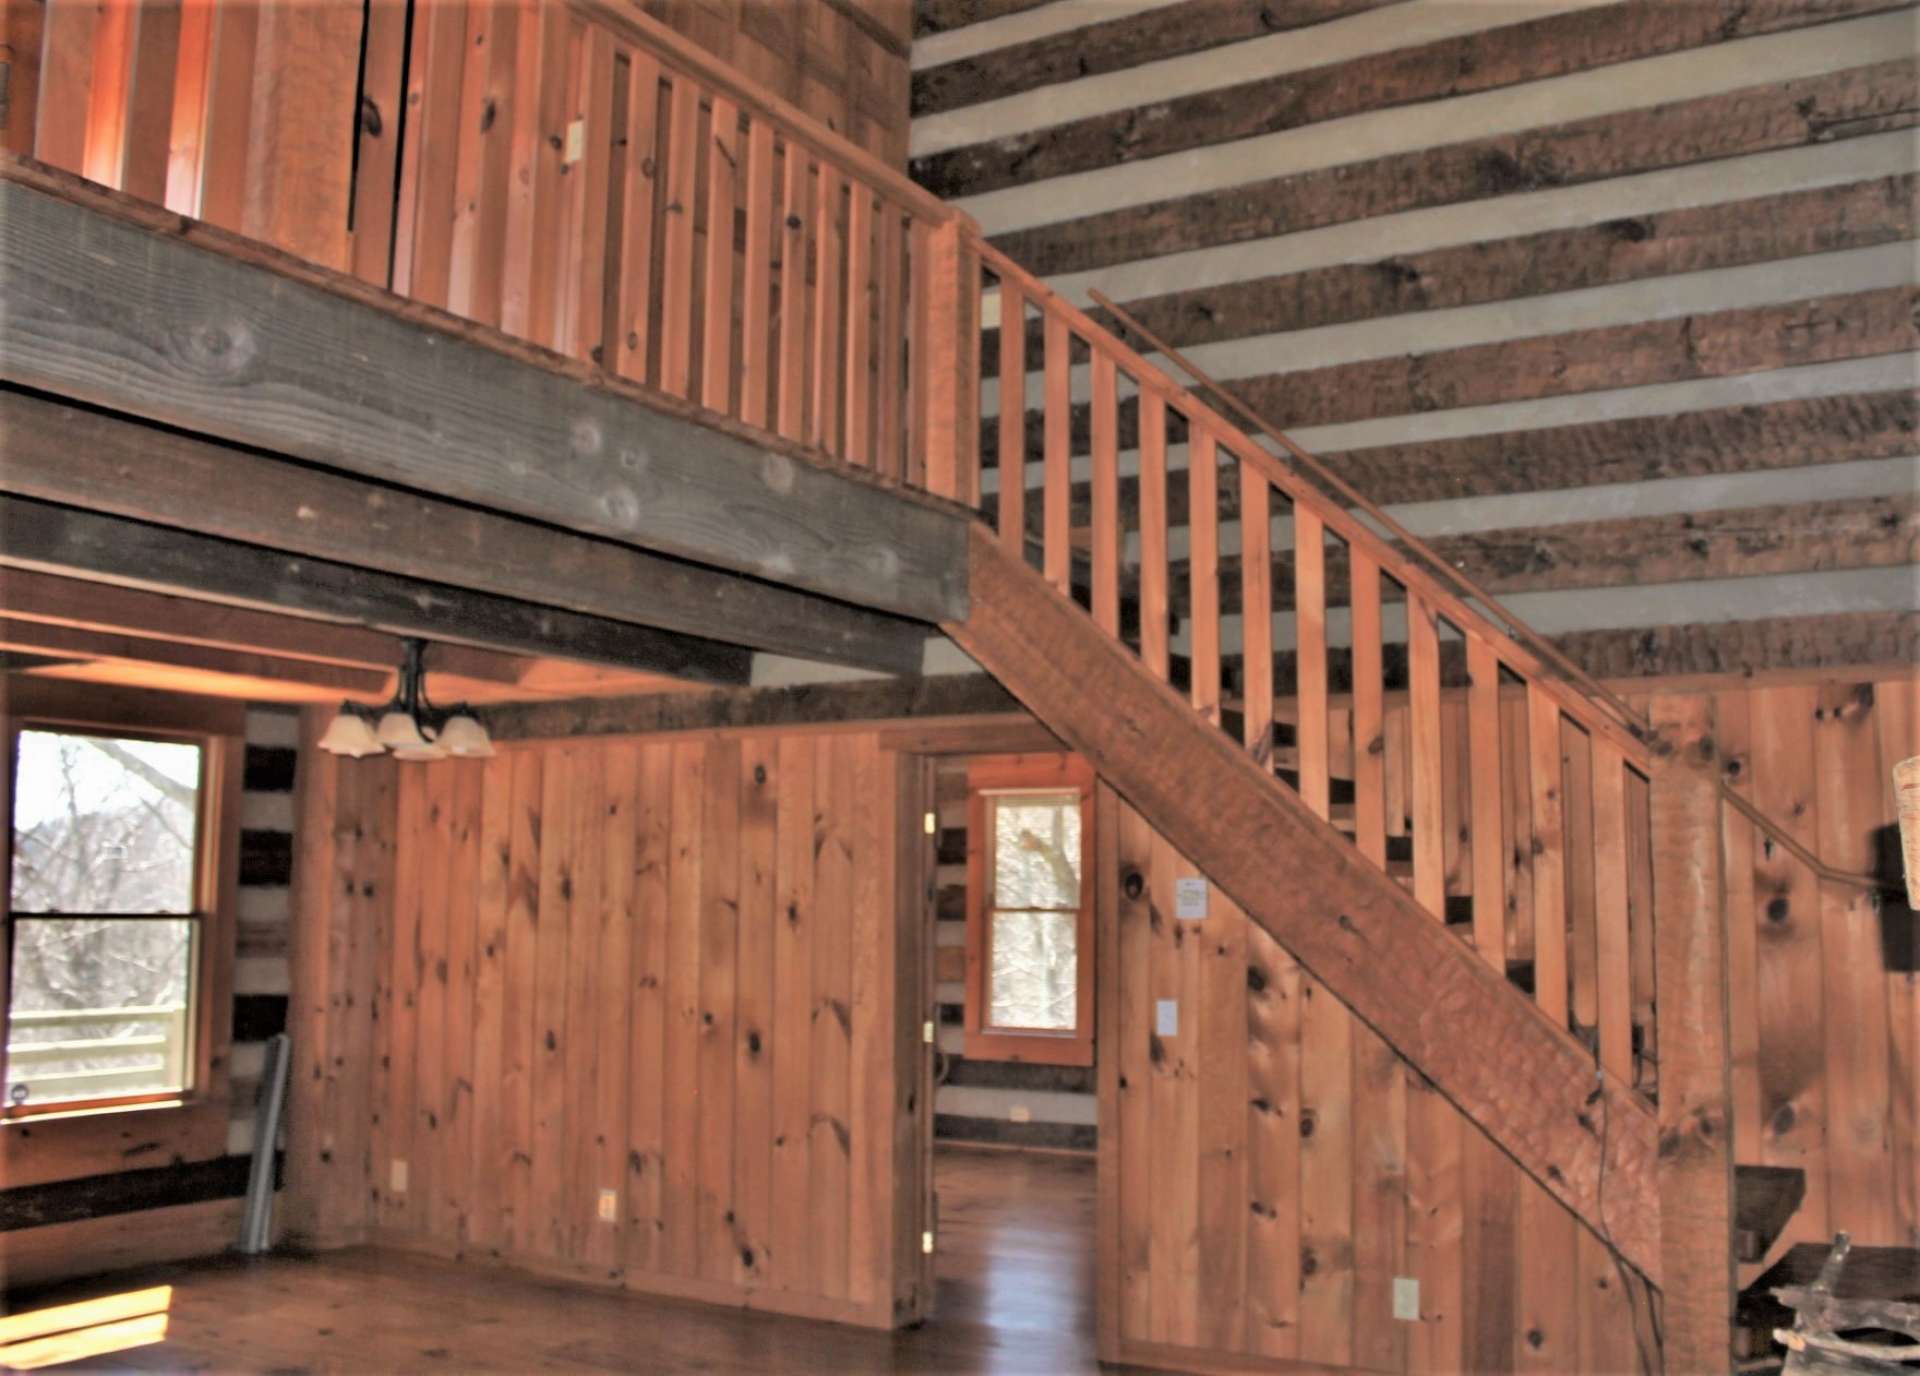 The hand-hewn staircase leads your guests to the bedroom loft area.